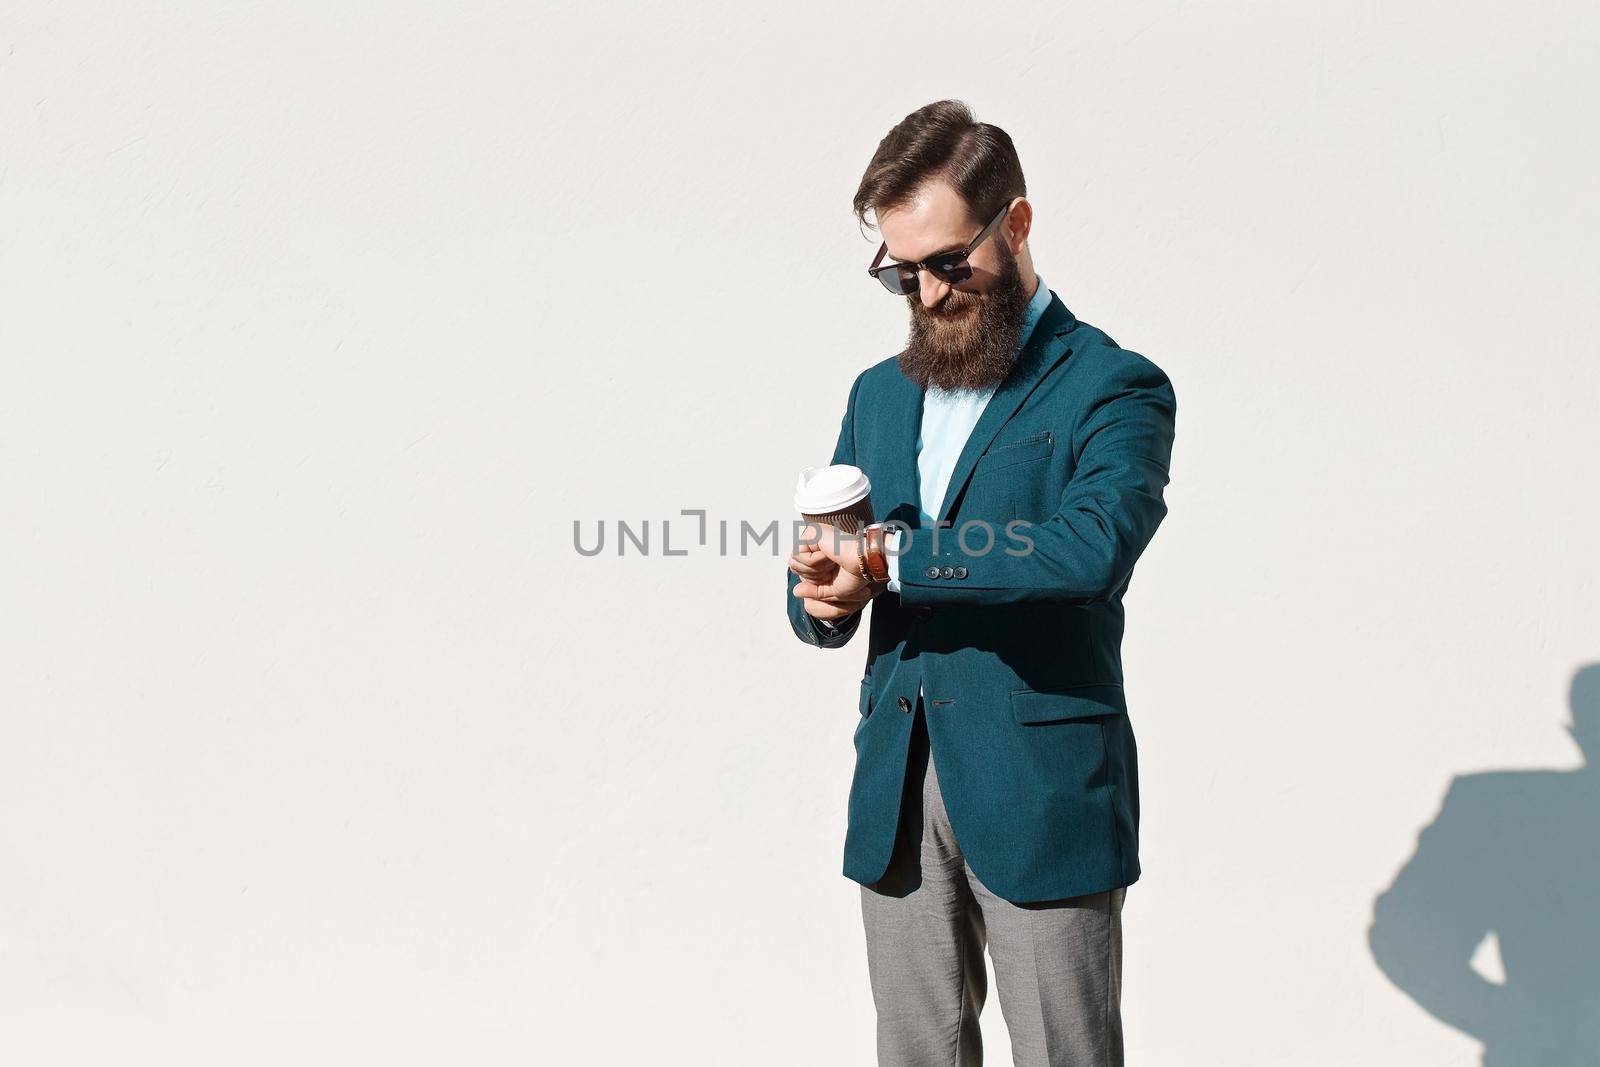 Stylish man with beard wearing a jacket, shirt and bow tie cheking time